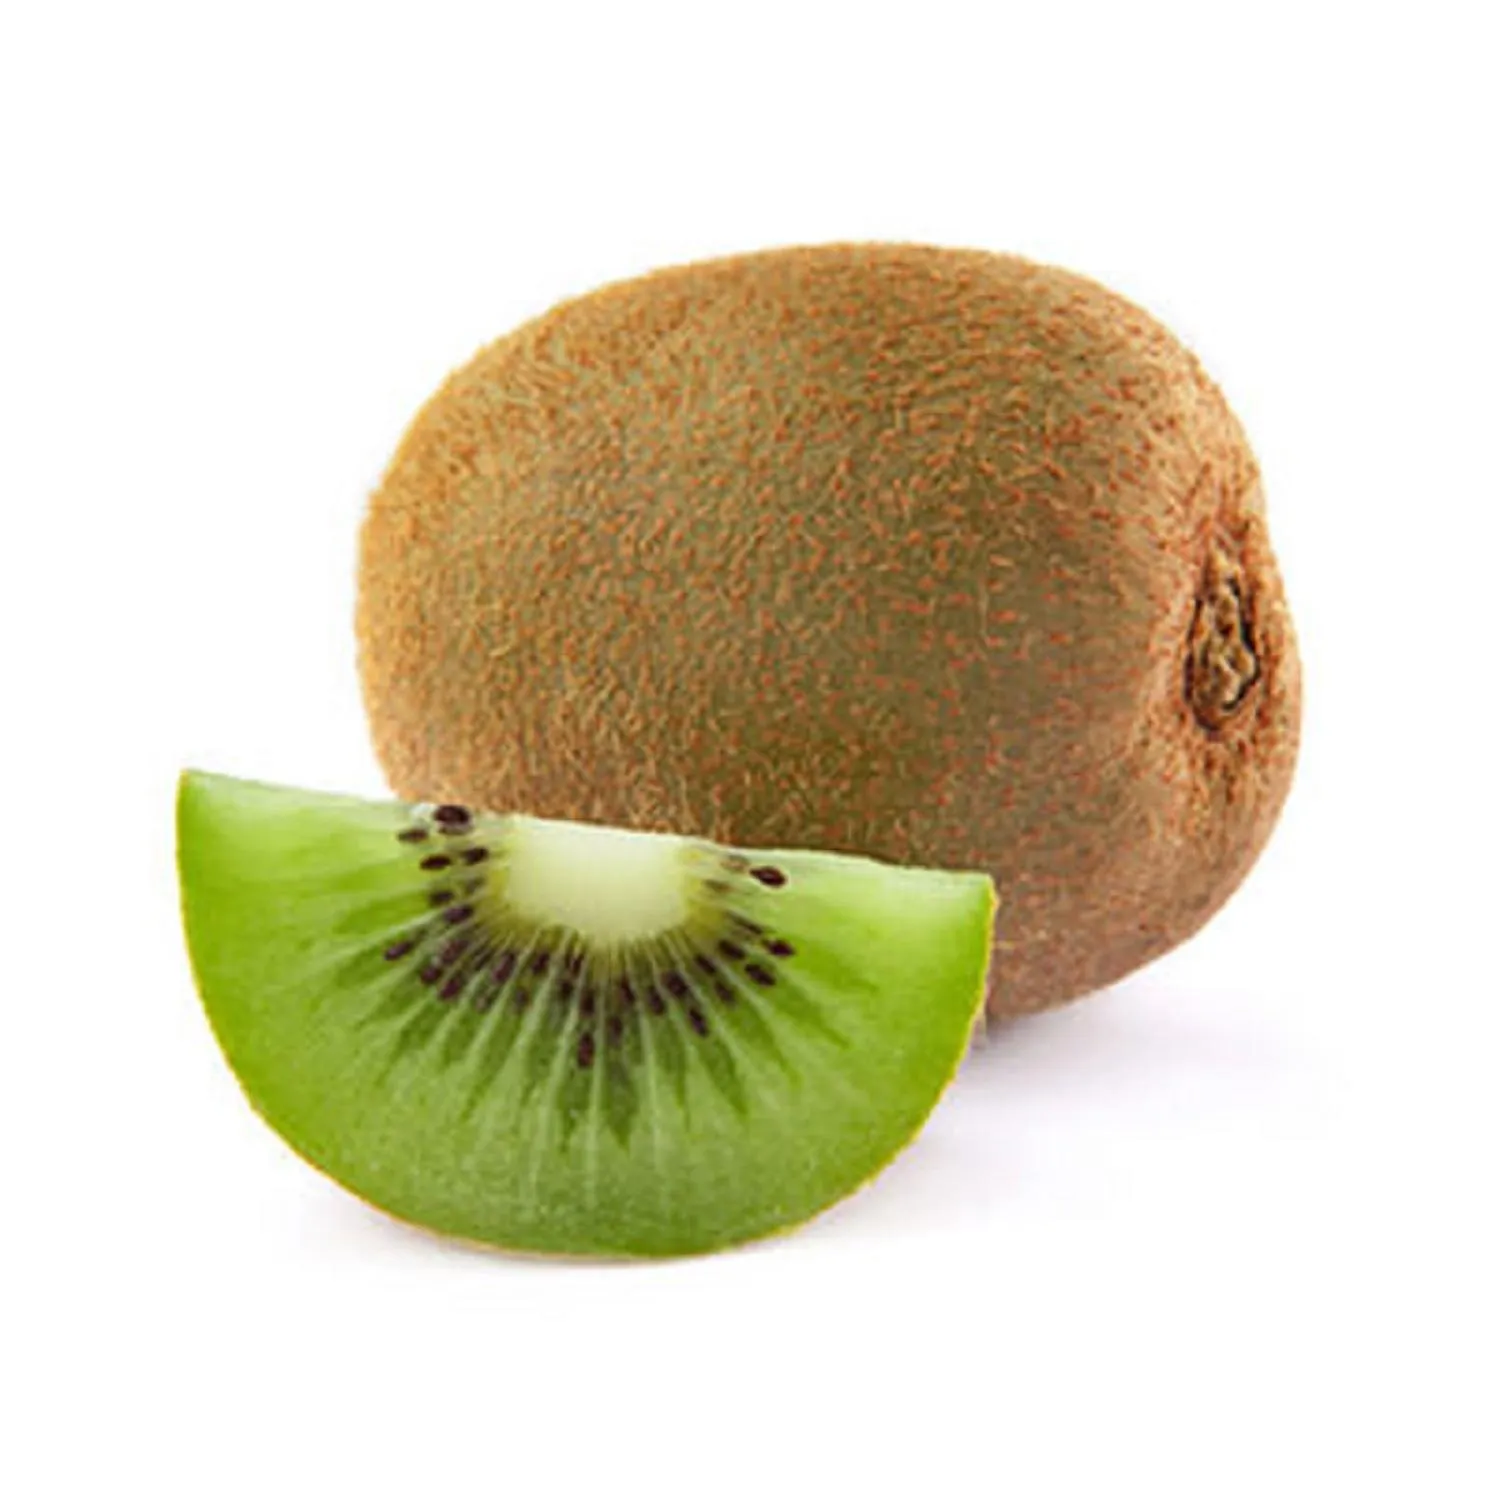 Buy kiwi fruit calories + great price with guaranteed quality